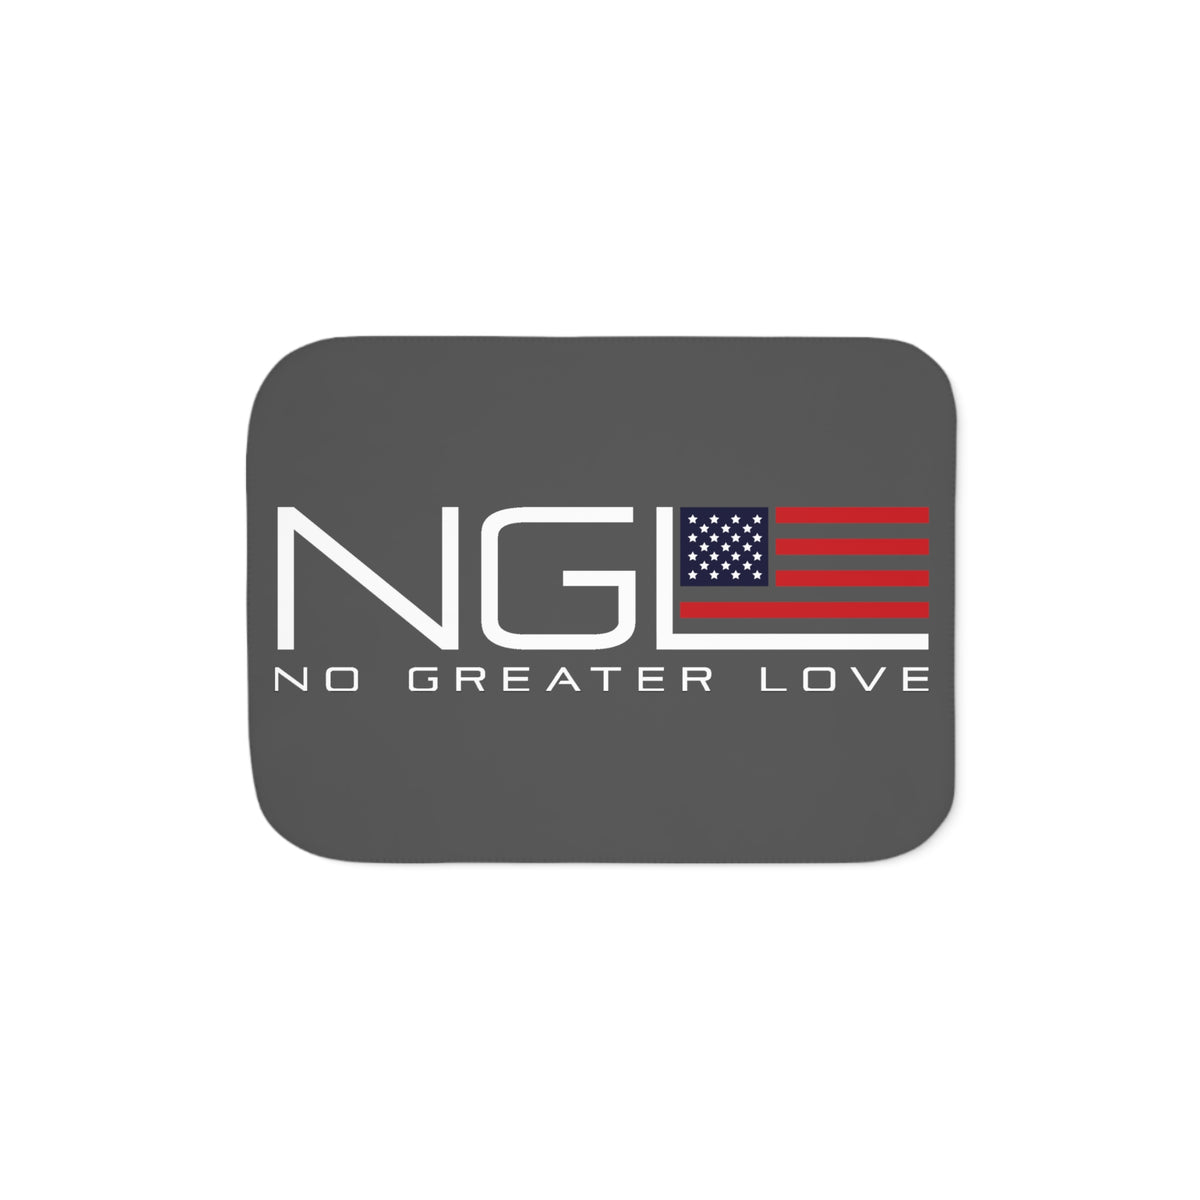 NGL Logo Sherpa Blanket, Two Colors